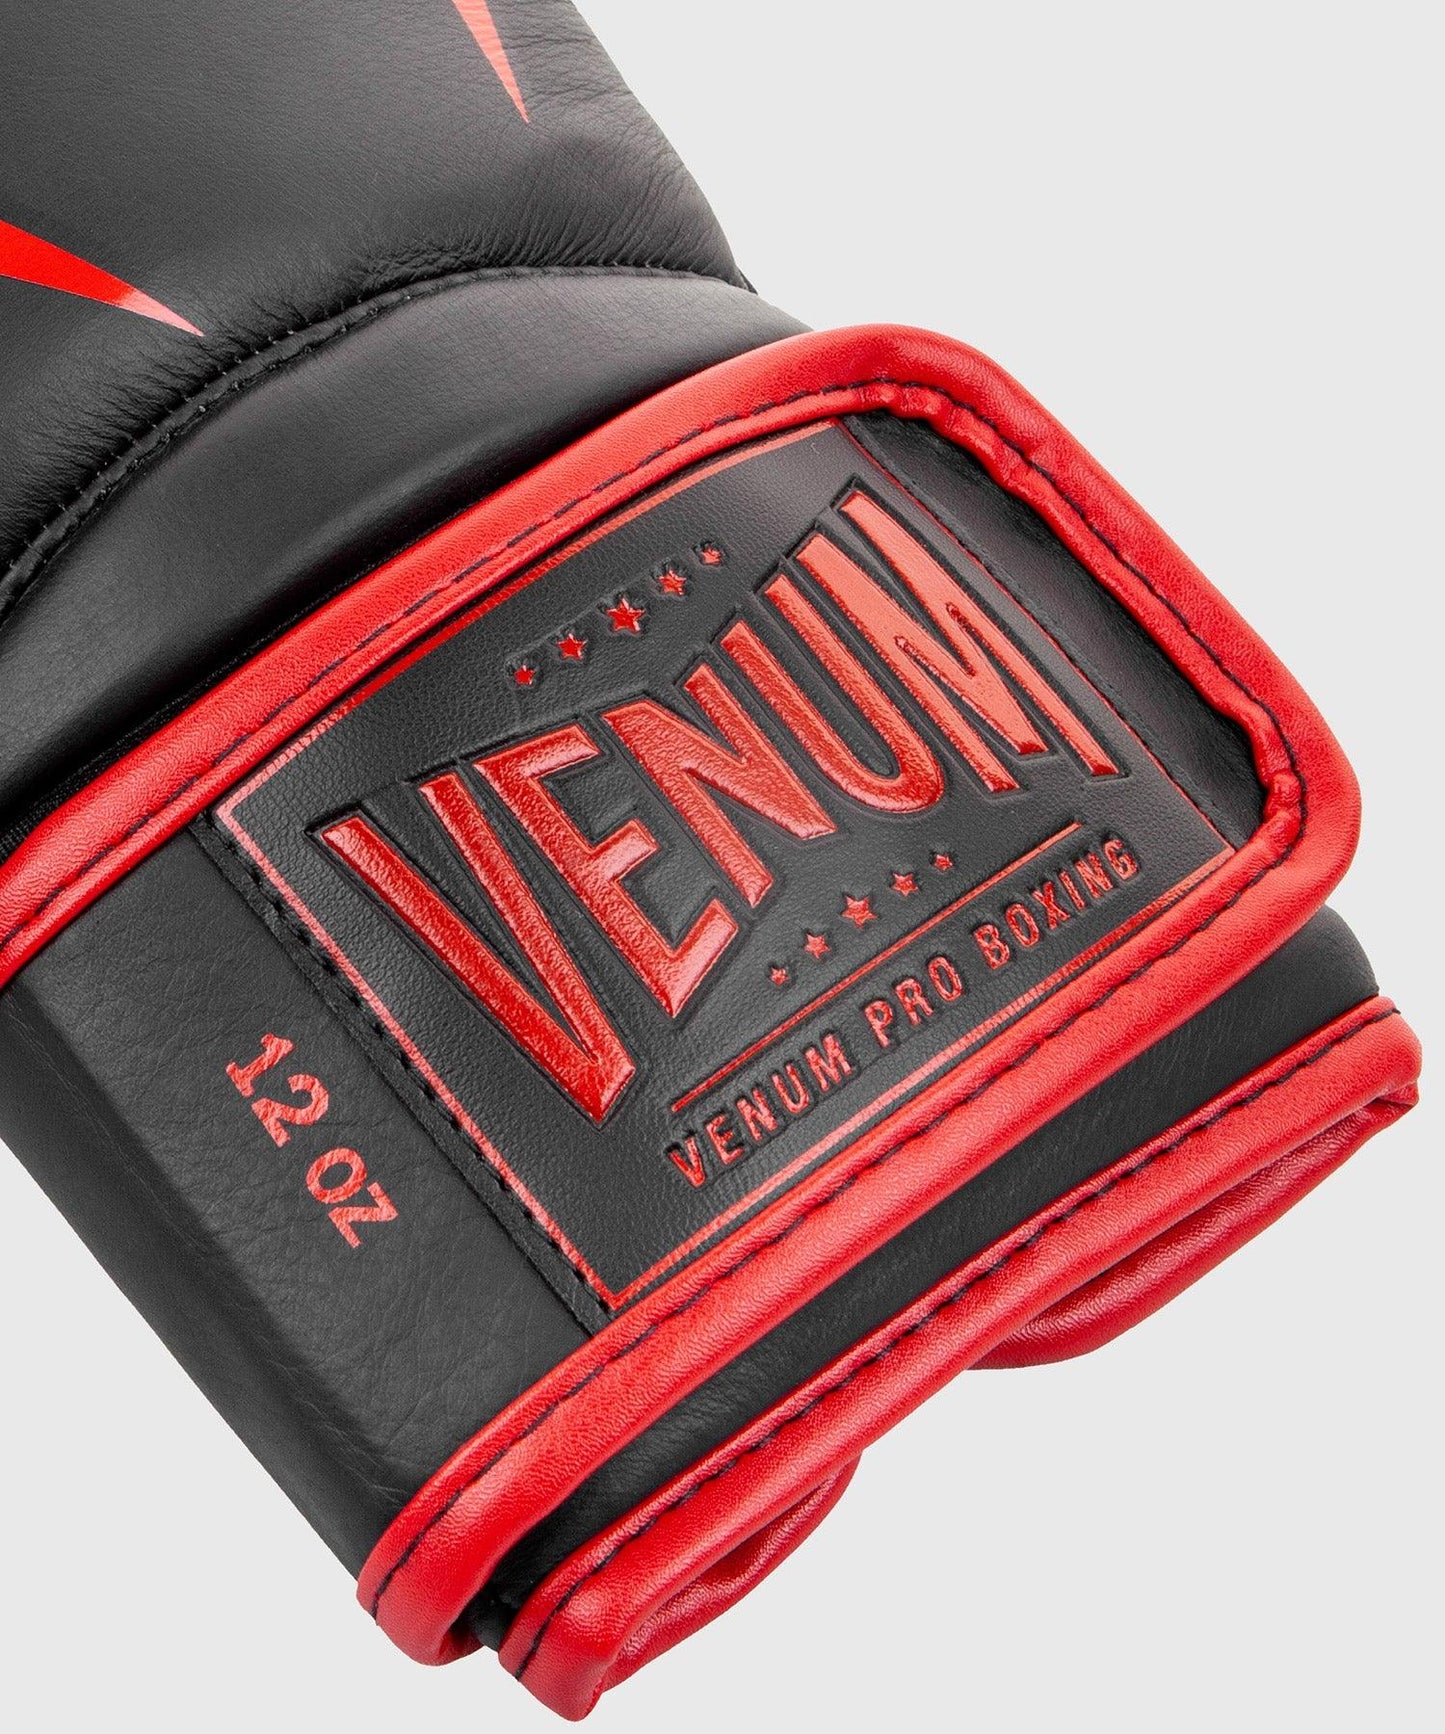 Venum Giant 2.0 Pro Boxing Gloves Velcro - Black/Red Picture 6